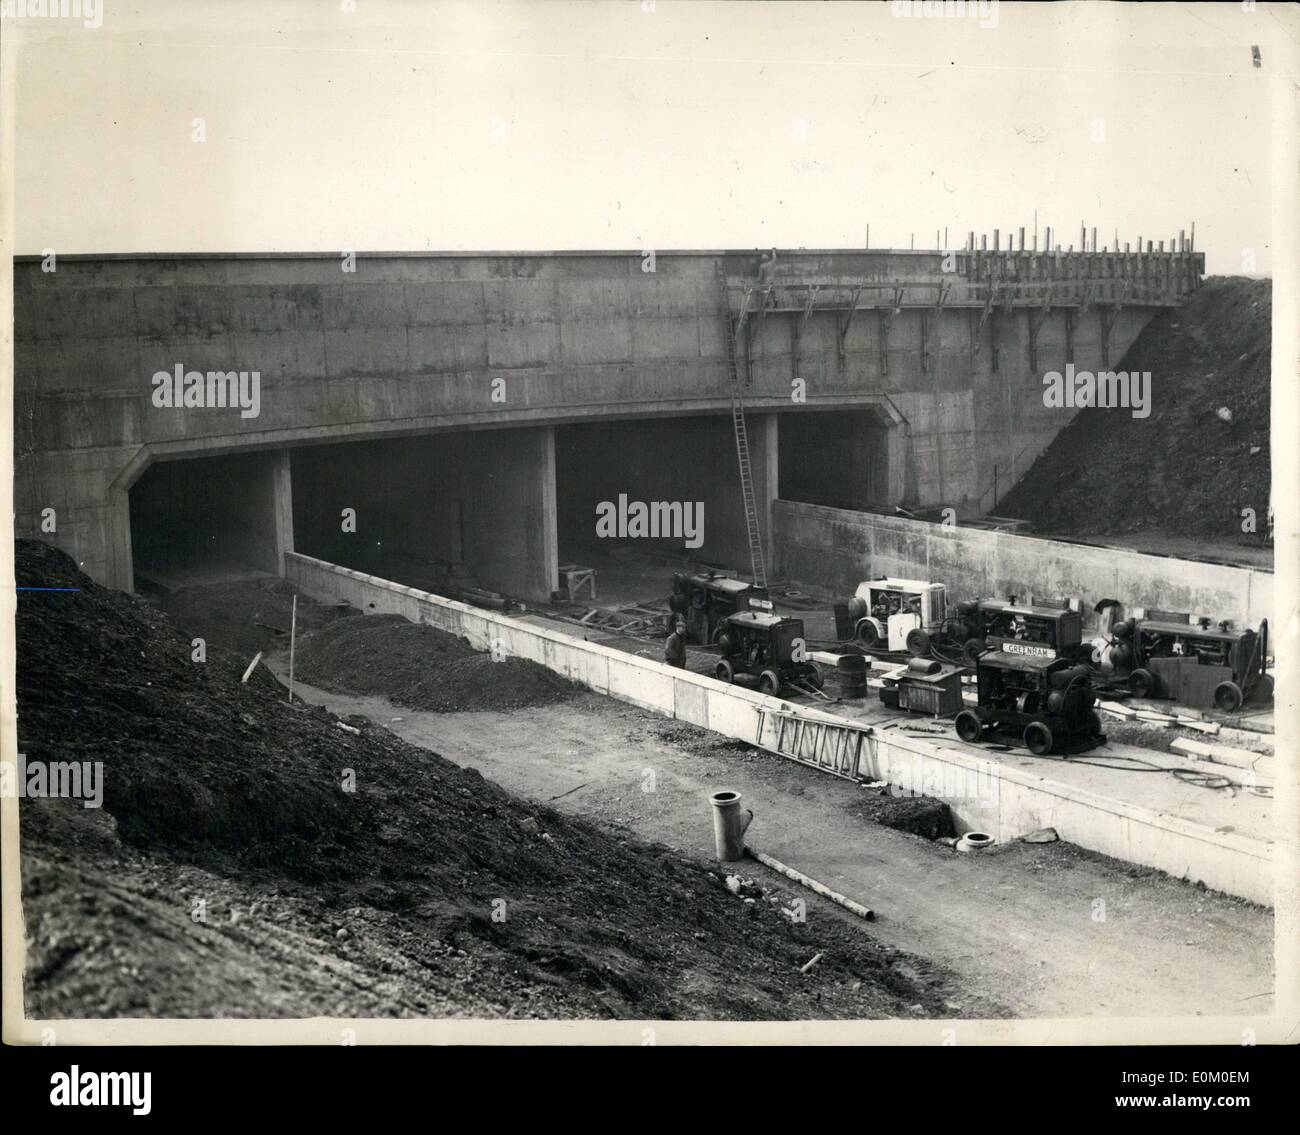 Feb. 02, 1953 - New Maintenance Base For London Airport: A new maintenance base provided for Boac by the Ministry of Civil Aviation, is under constructionist at London Airport, Photo Shows The Southerner end of the four lane tunnel from the Bath Road to the central terminal area under construction. Stock Photo